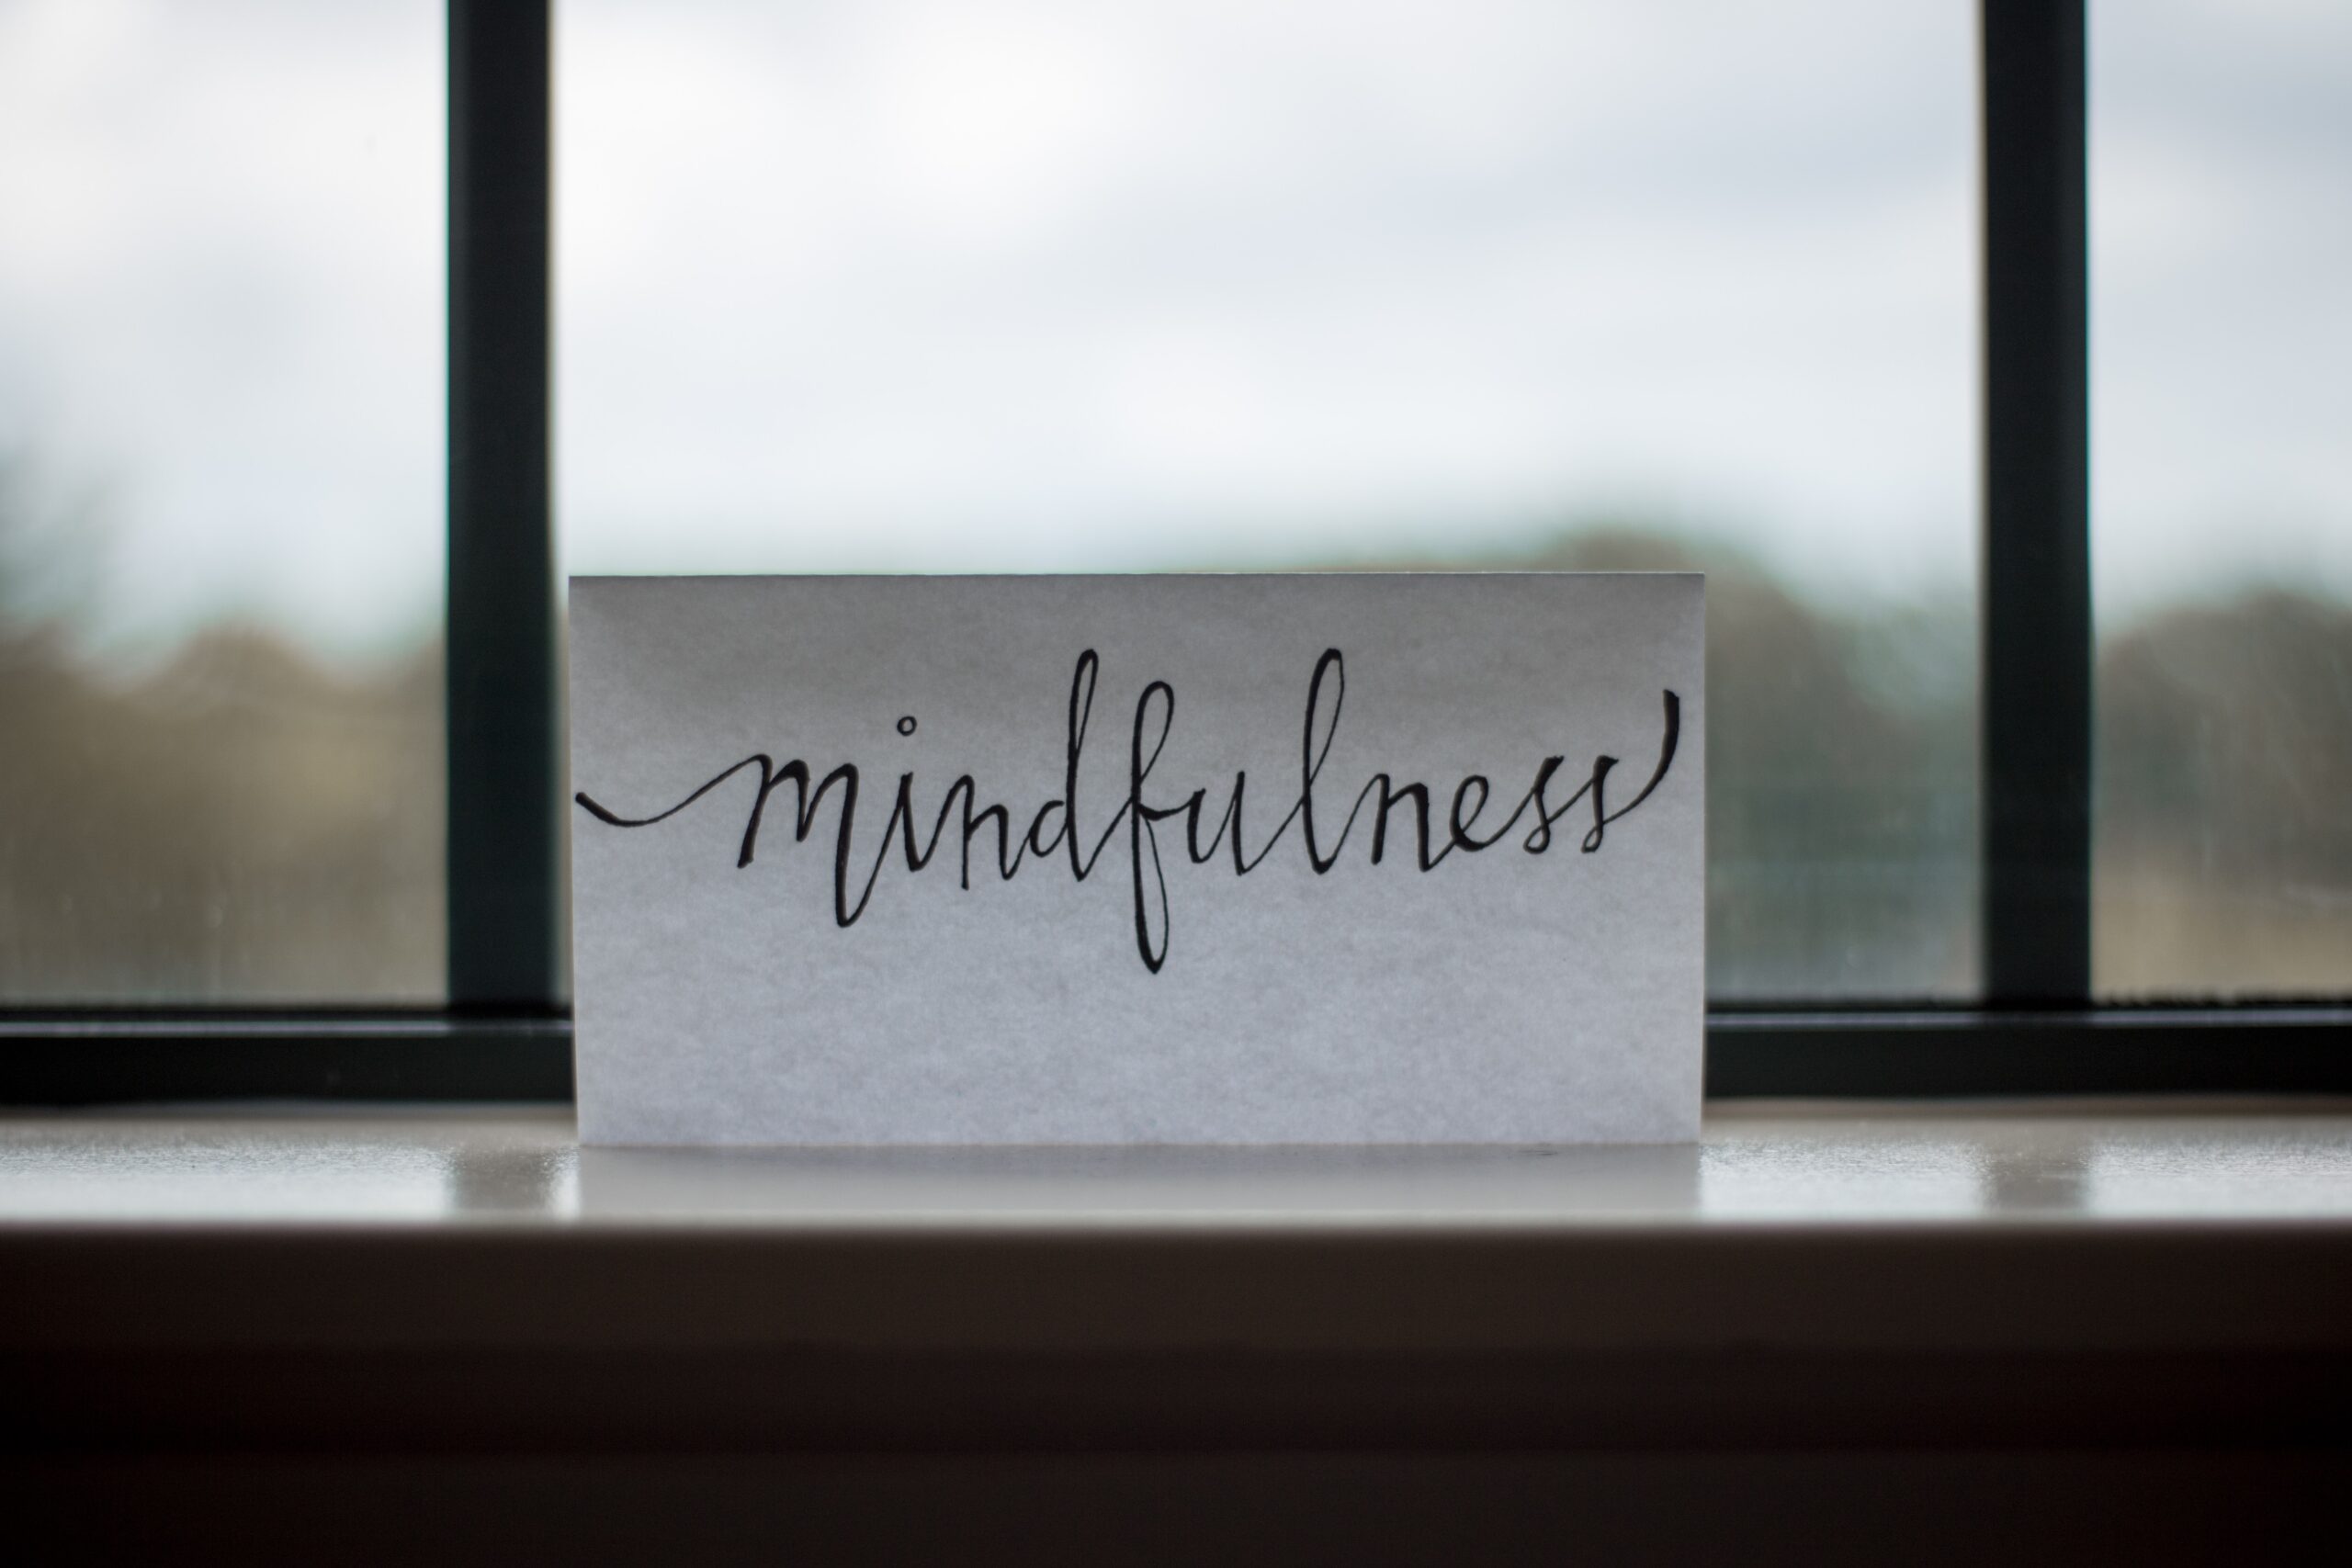 Incorporate senses into your zen meditation room and practice using sound. Pictured: A sign with the word 'mindfulness' written on it.